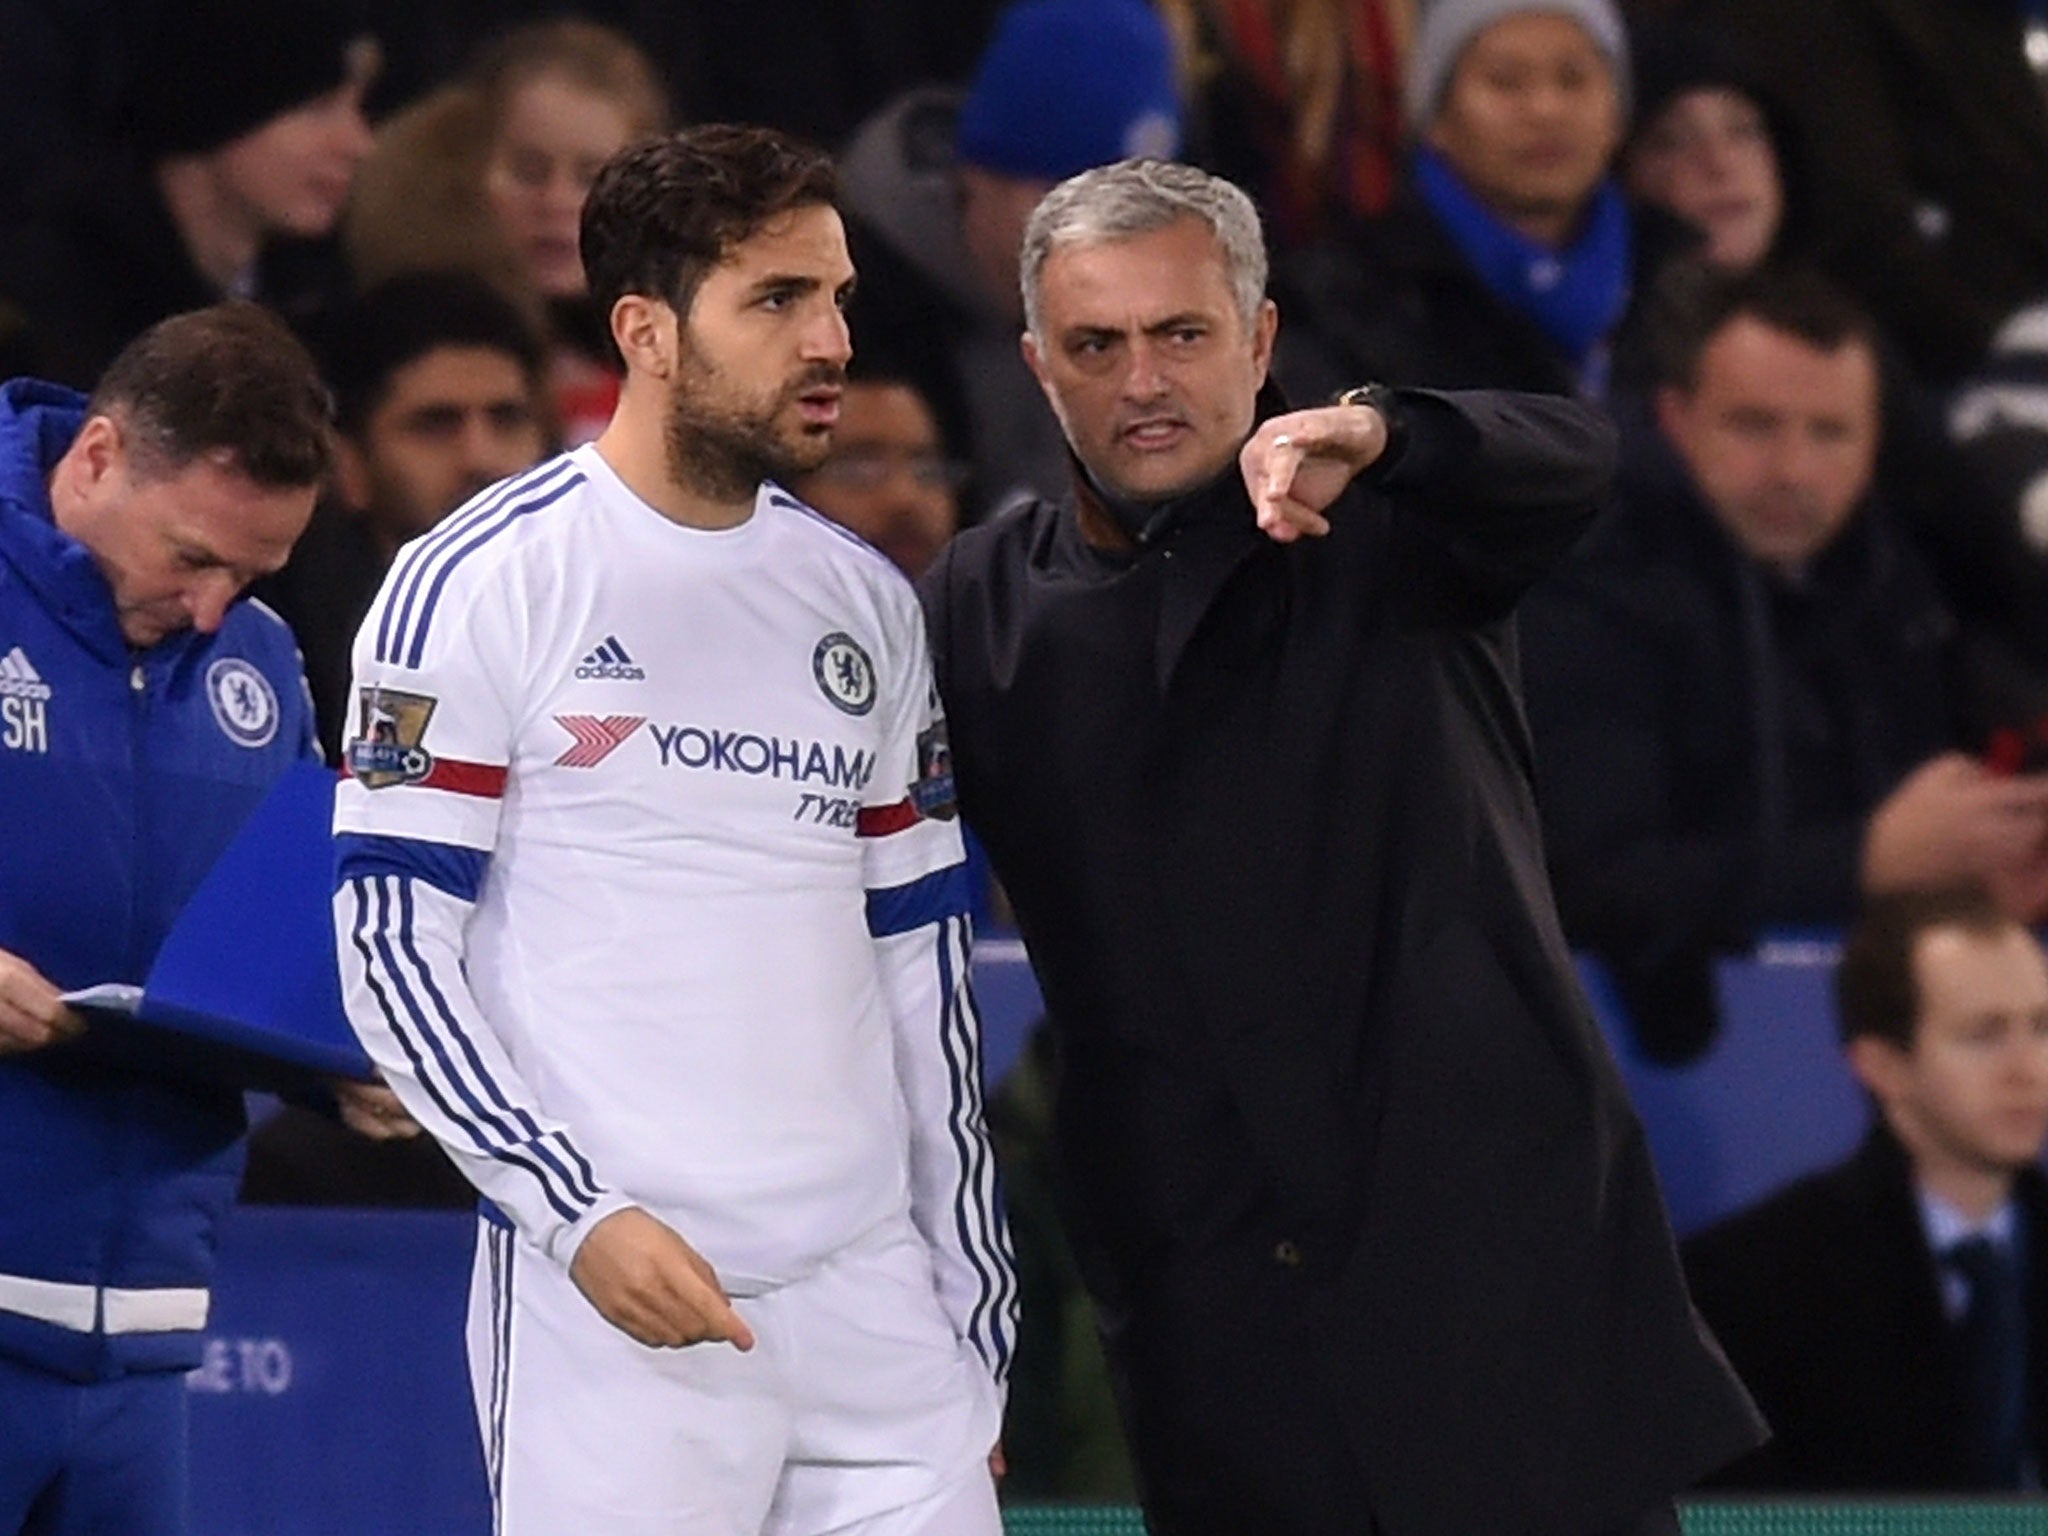 Cesc Fabregas and Jose Mourinho's relationship has come under intense scrutiny since the latter was sacked by Chelsea